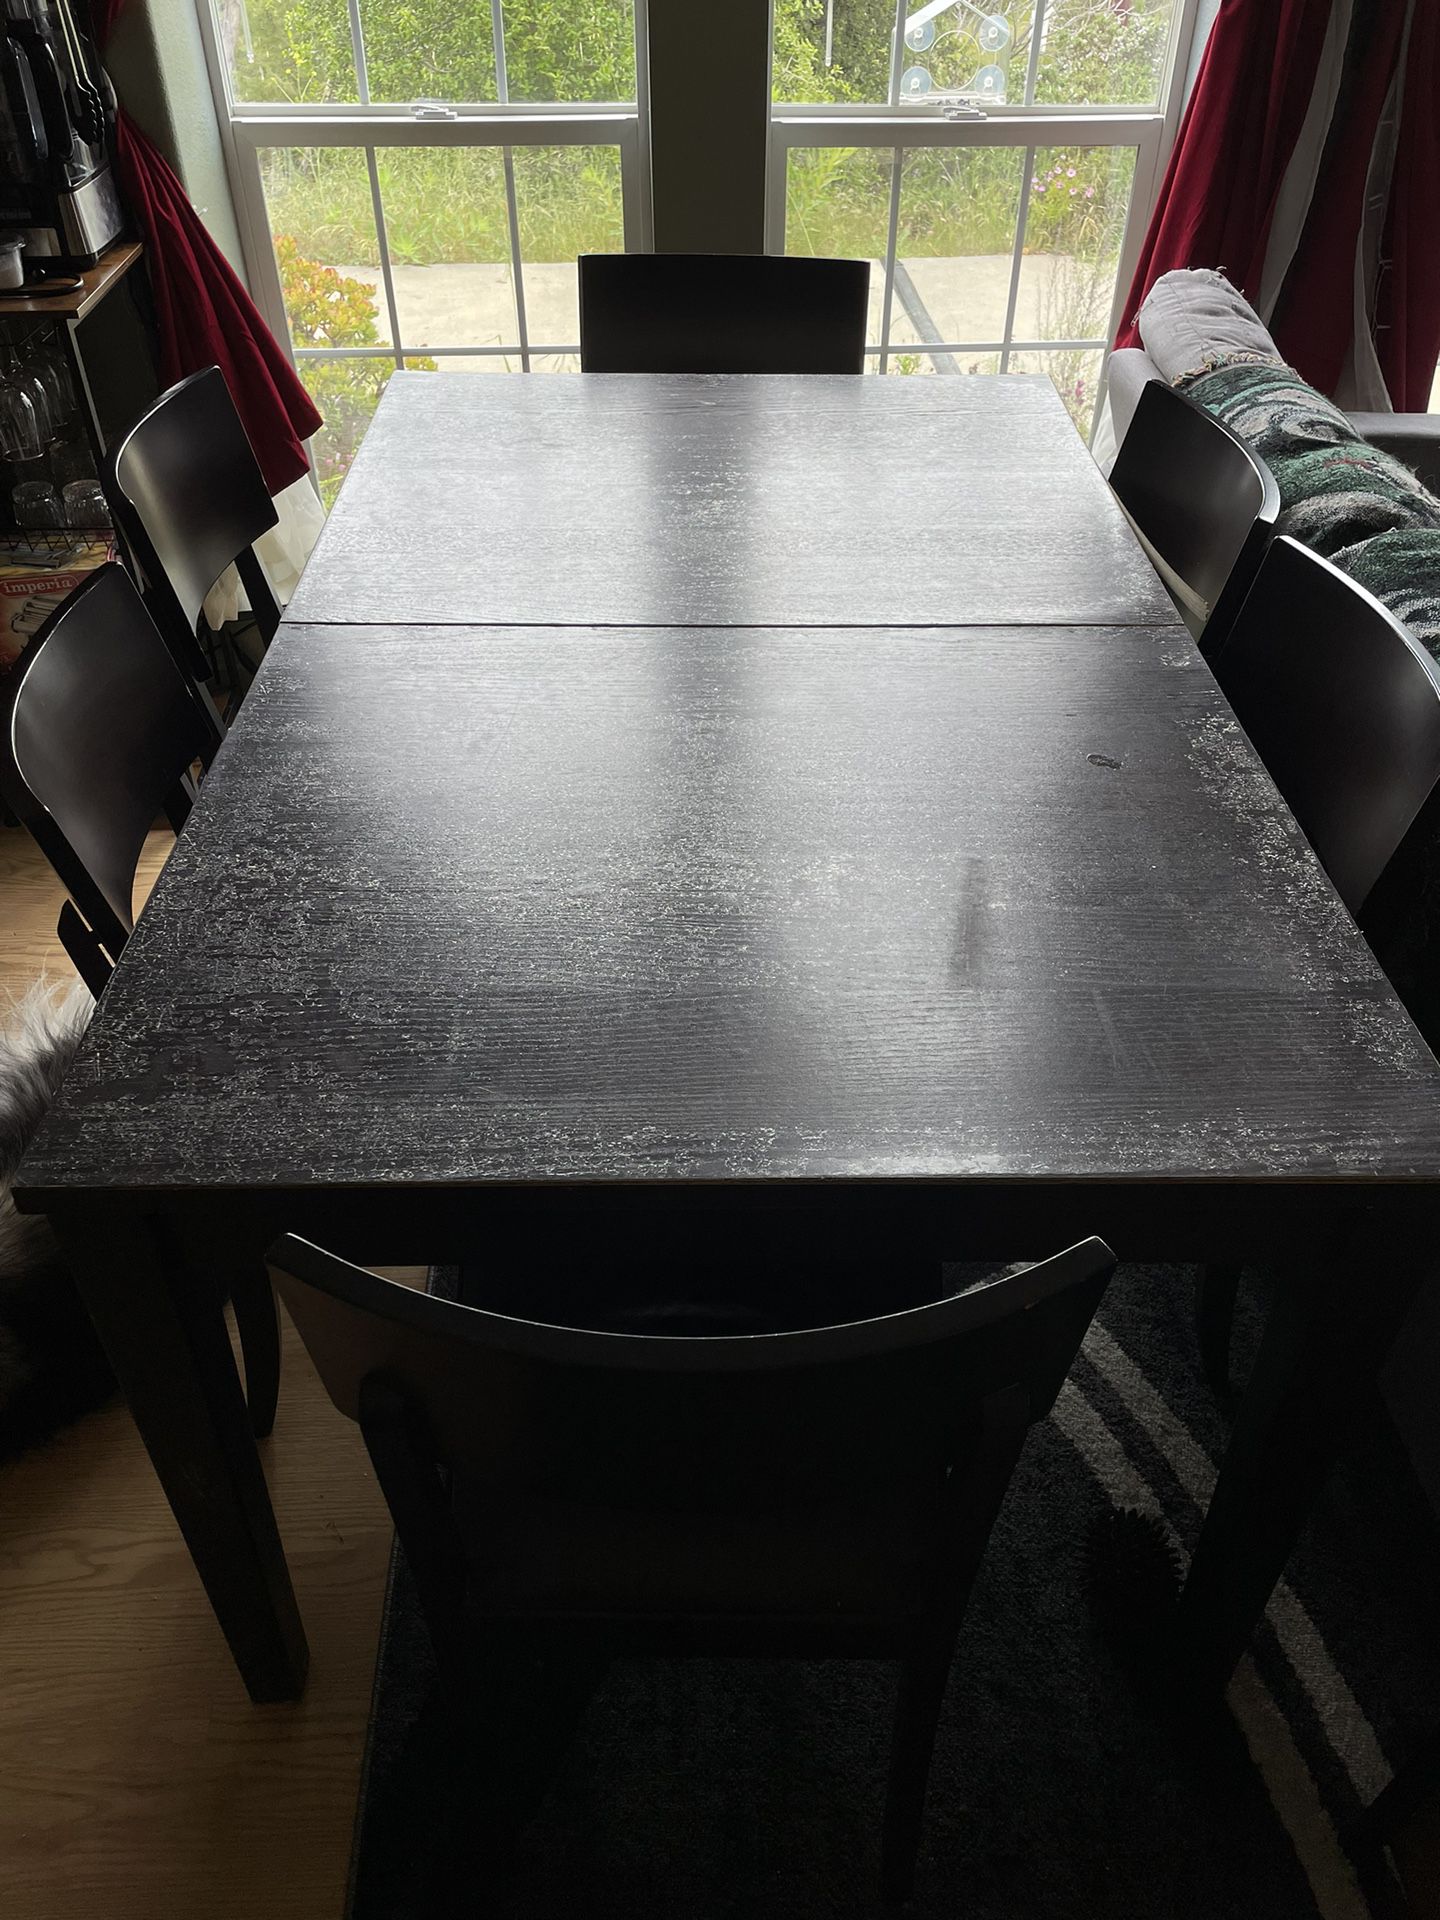 Dining Room Kitchen Table With 6 Chairs 61x38in